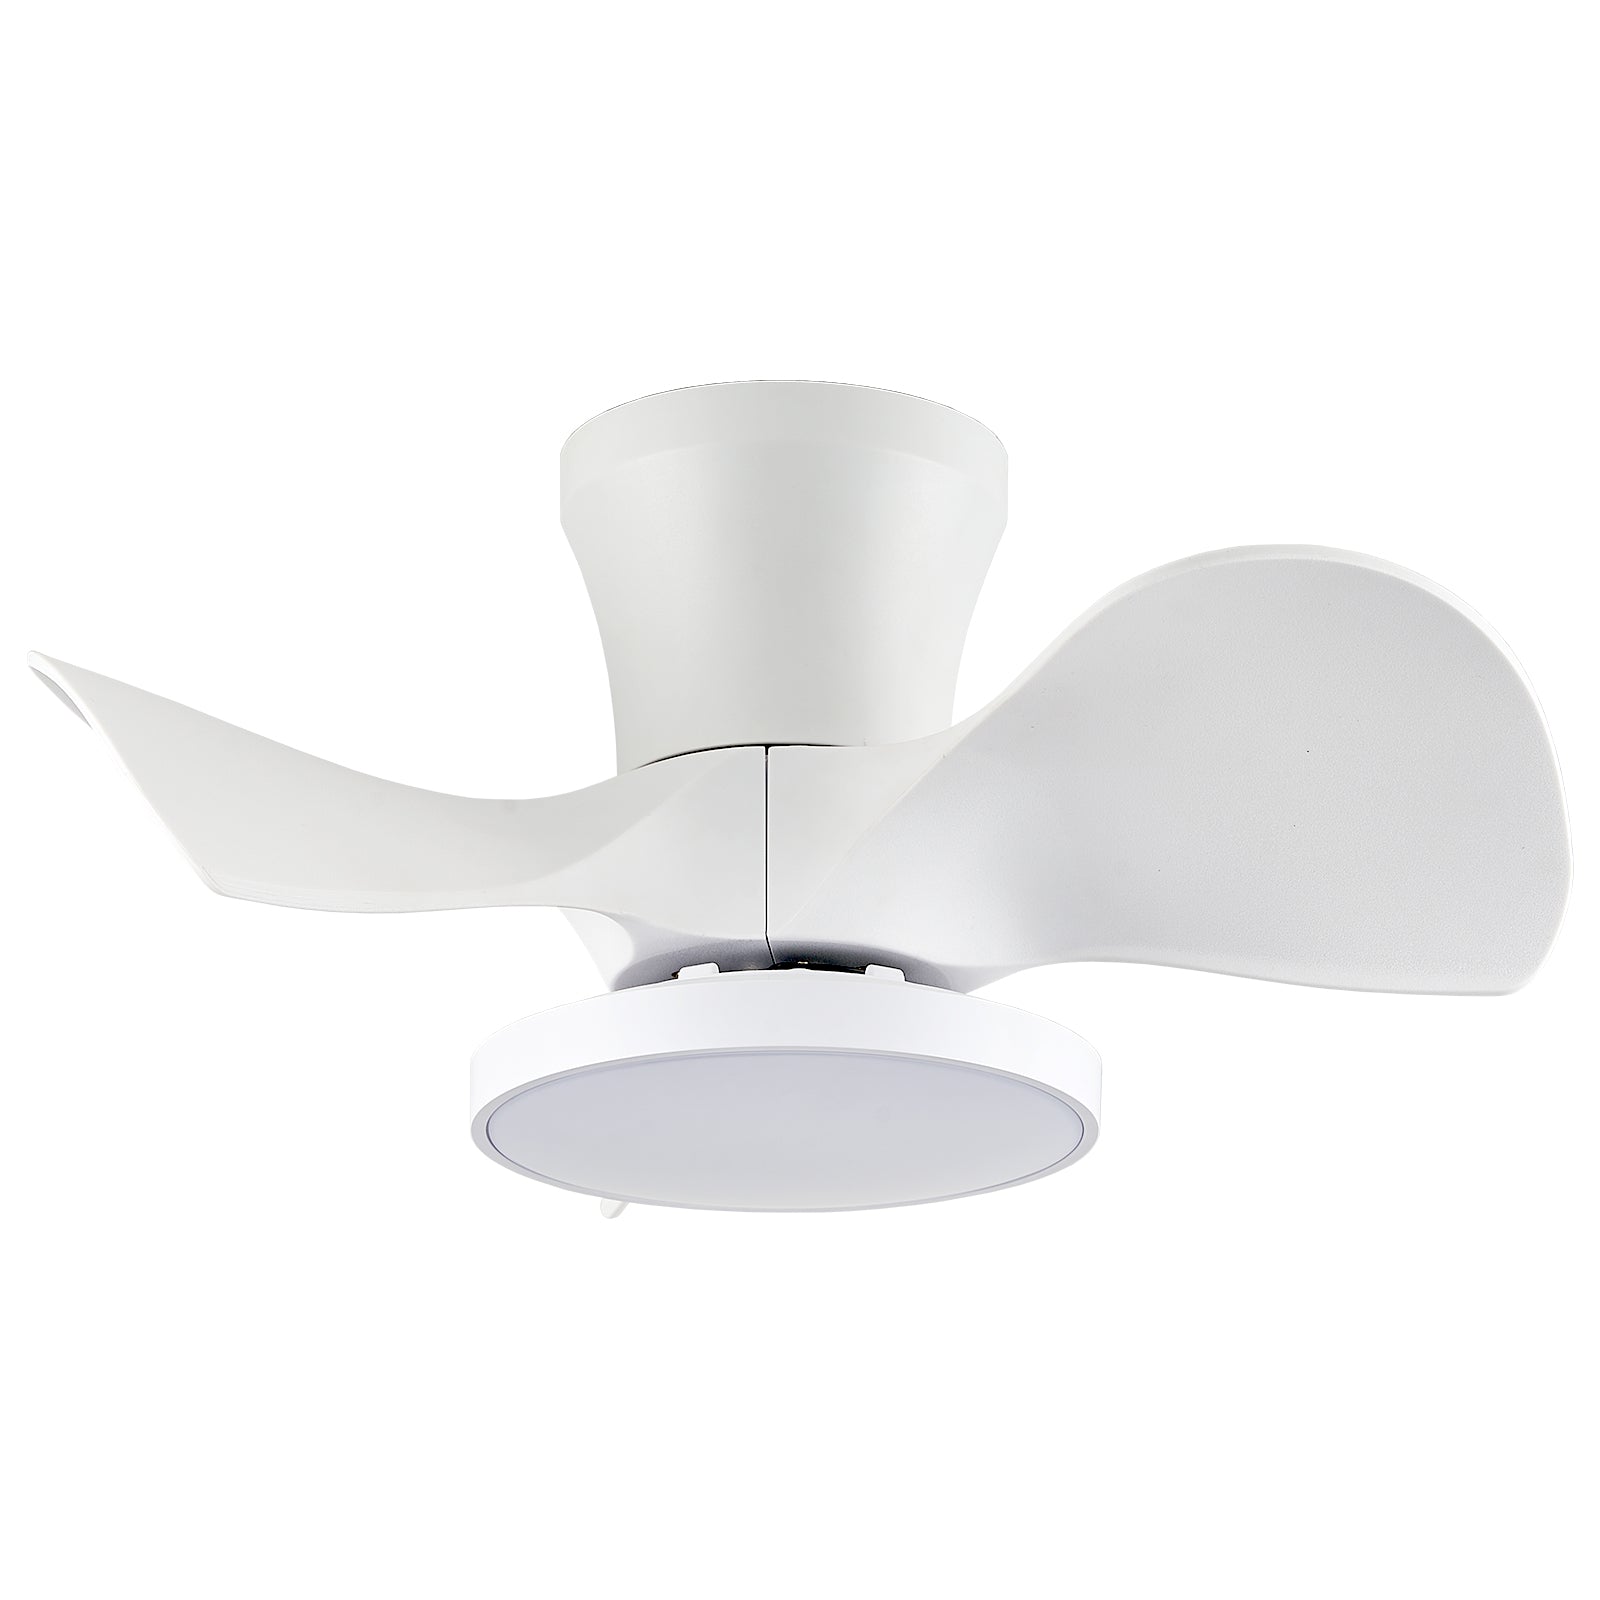 Lulius 22" Ceilings Fans with Lights and Remote, Small Quiet White Ceiling Fan with LED Light for Bathroom,Kitchen Patio (White)